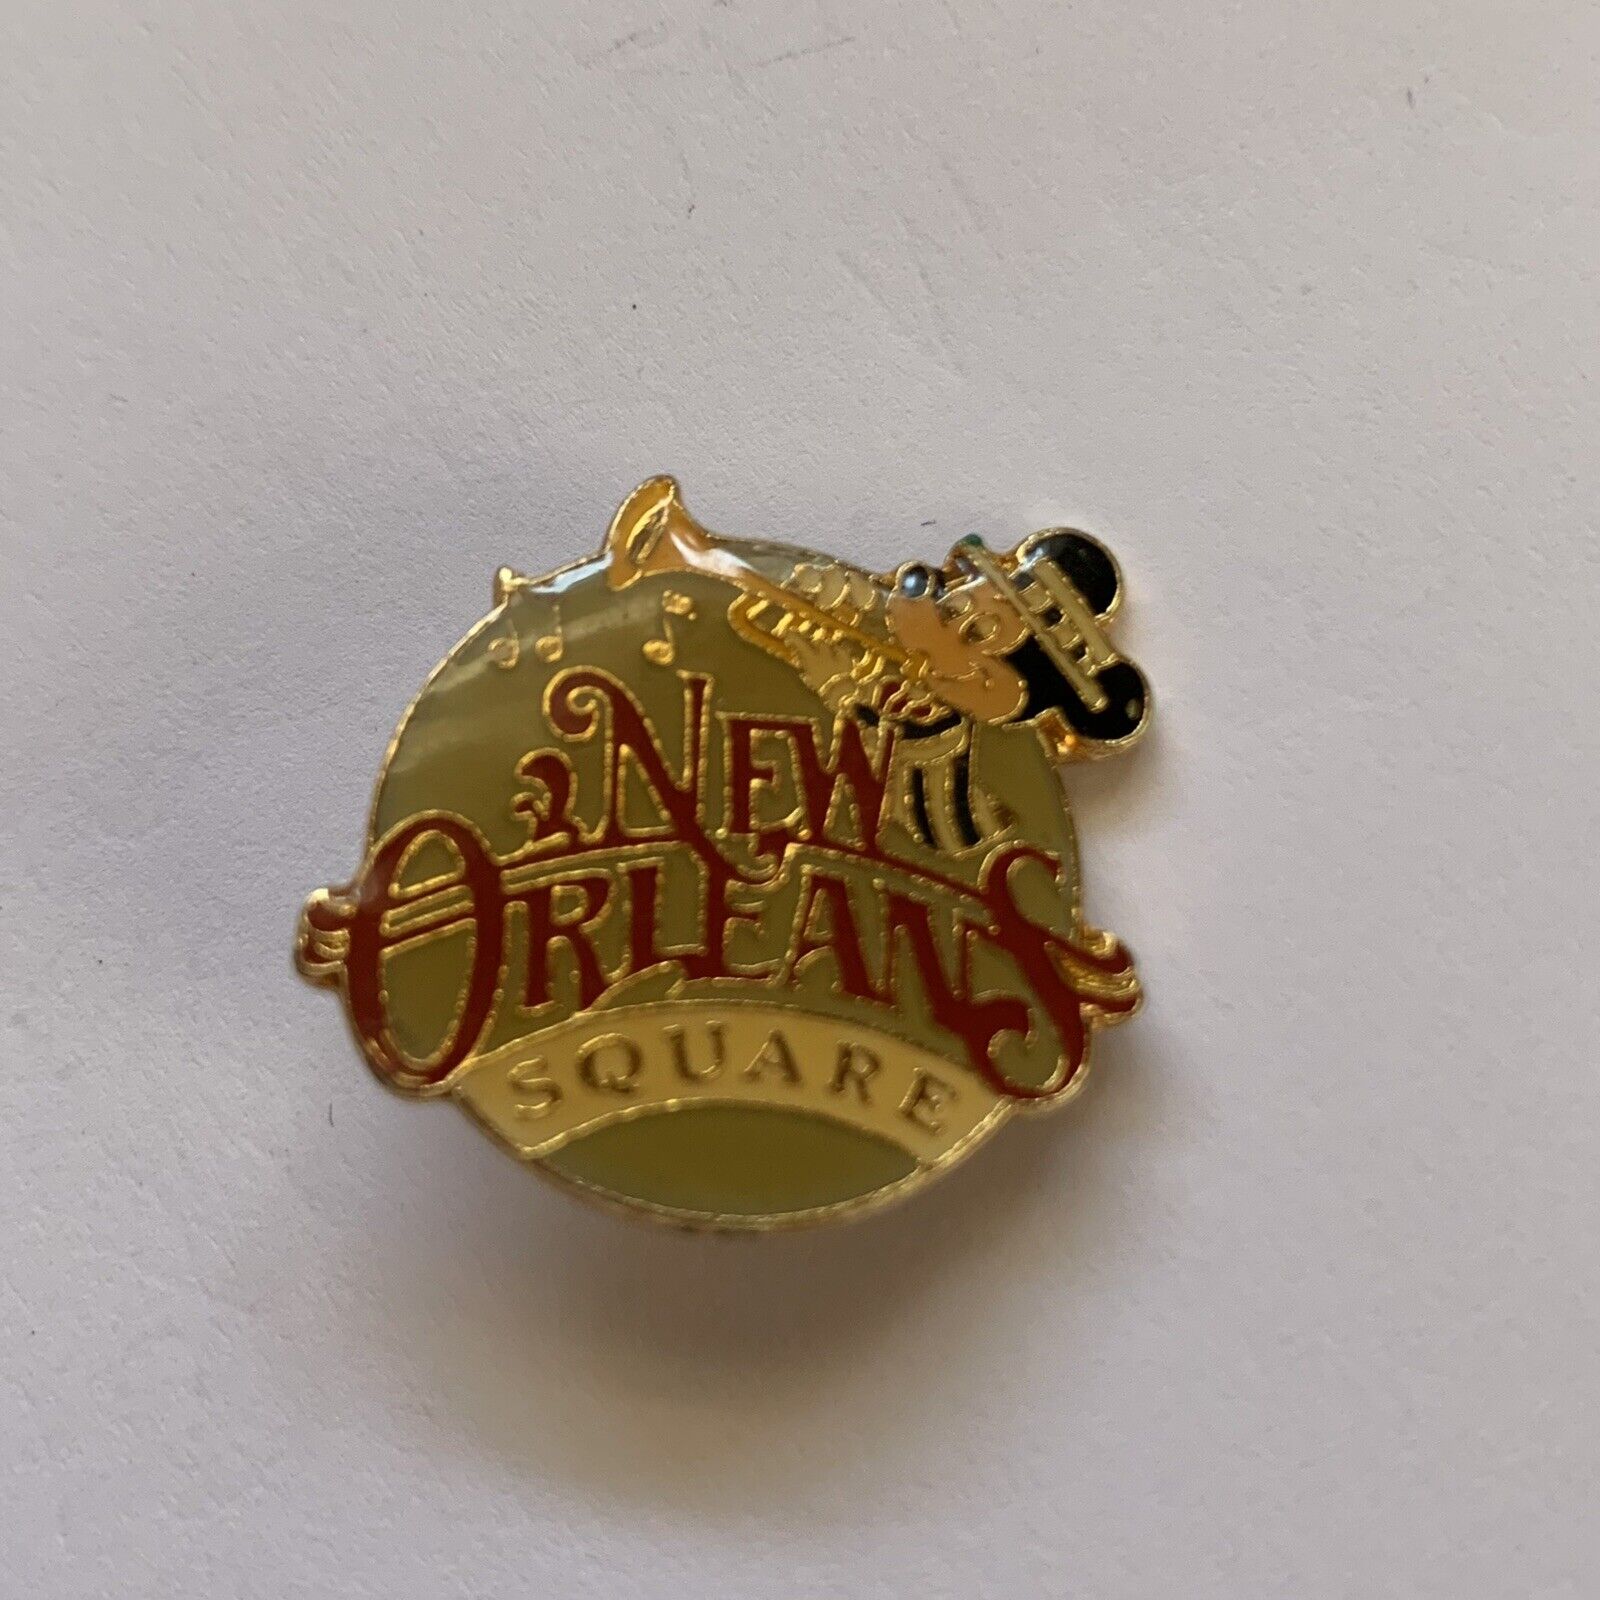 Vintage Disneyland New Orleans Square Mickey Playing Trumpet Pin